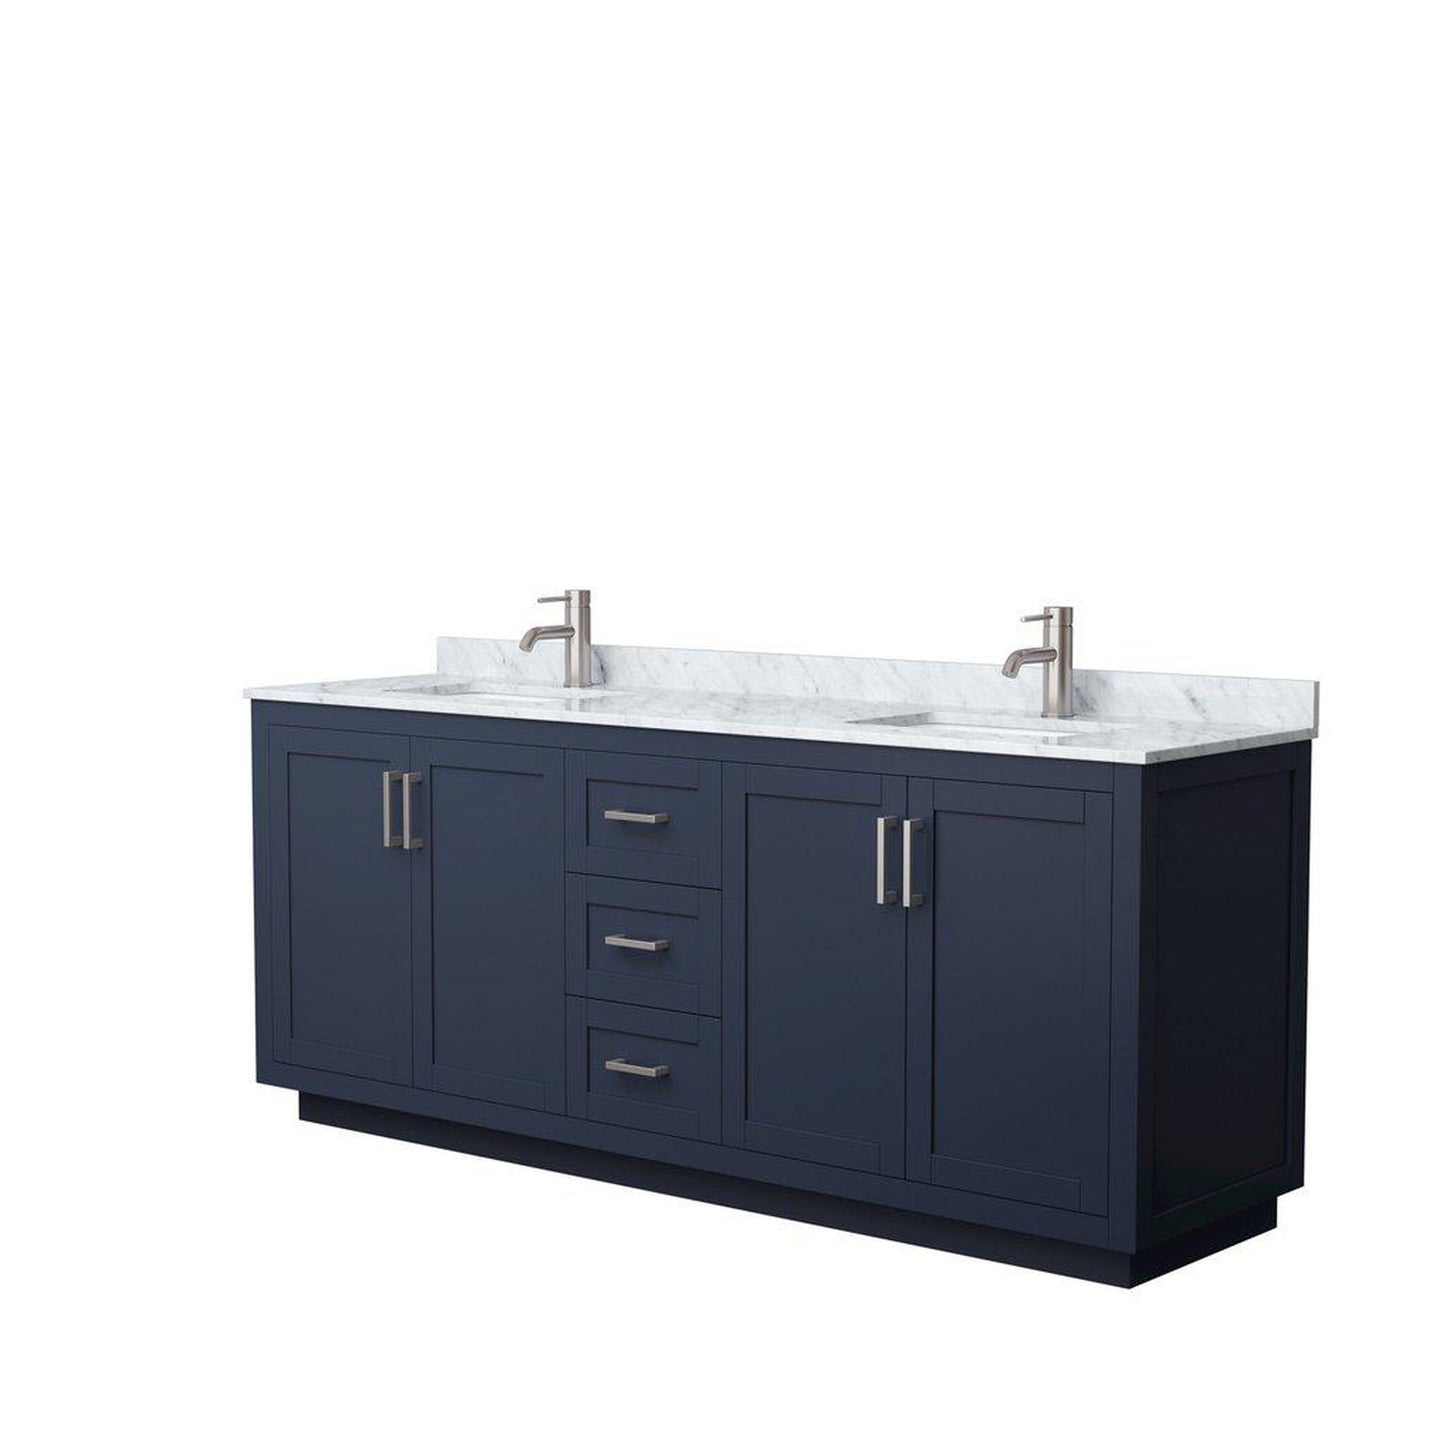 Wyndham Collection Miranda 80" Double Bathroom Dark Blue Vanity Set With White Carrara Marble Countertop, Undermount Square Sink, And Brushed Nickel Trim